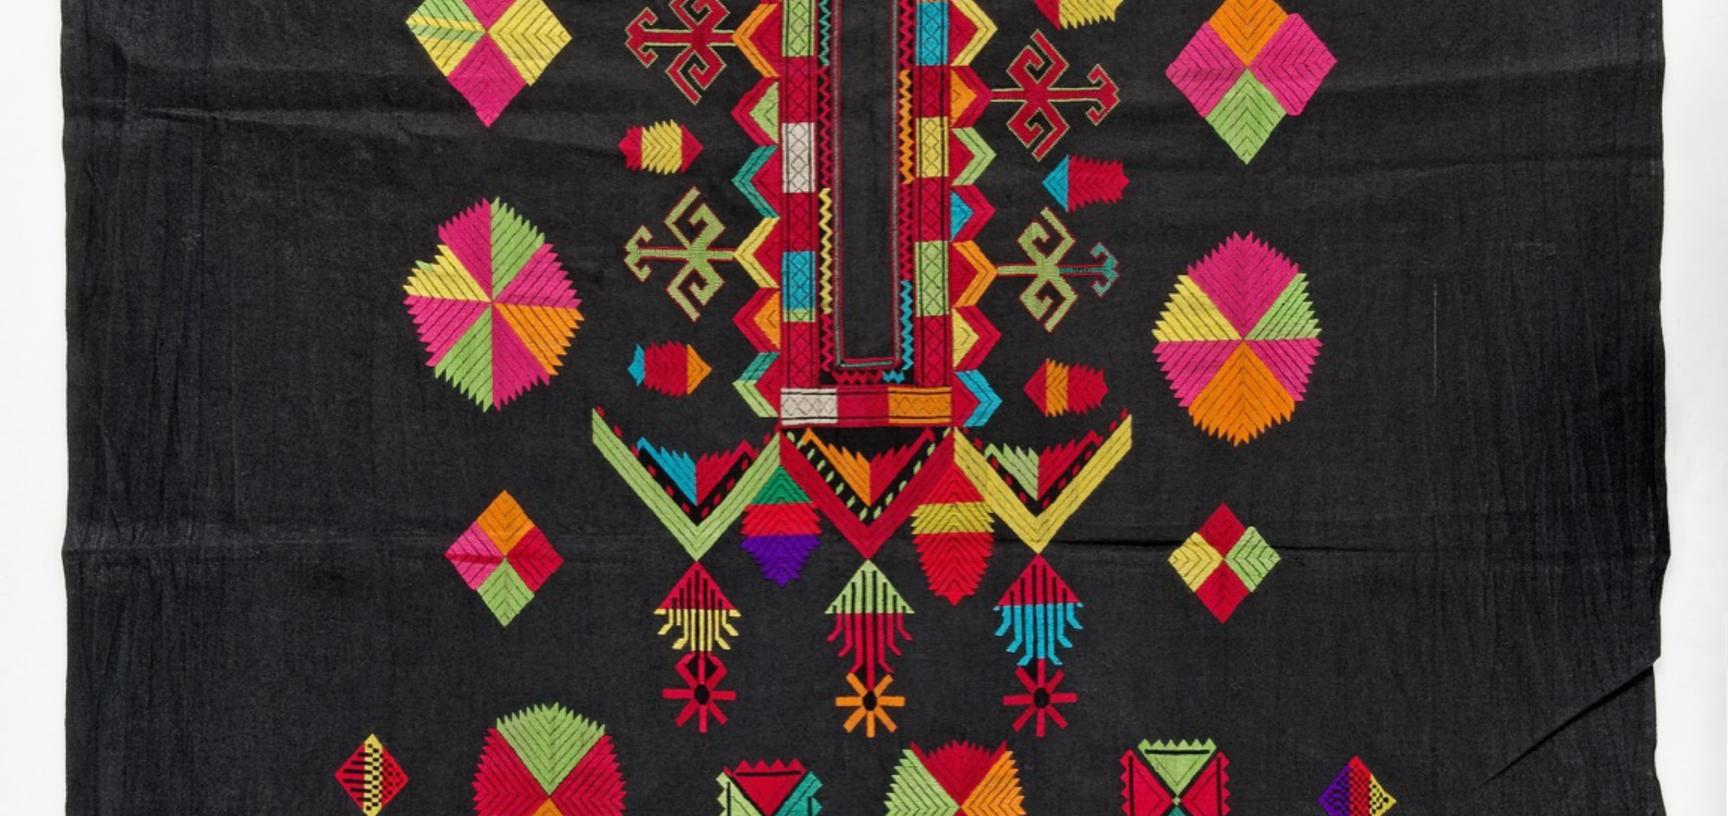 Embroidered cotton shift (incomplete). Bar Paro, Palas Valley, Kohistan, Pakistan. Instead of traditional silk, solar motifs and the protective power of the triangle are embroidered in cotton yarn.